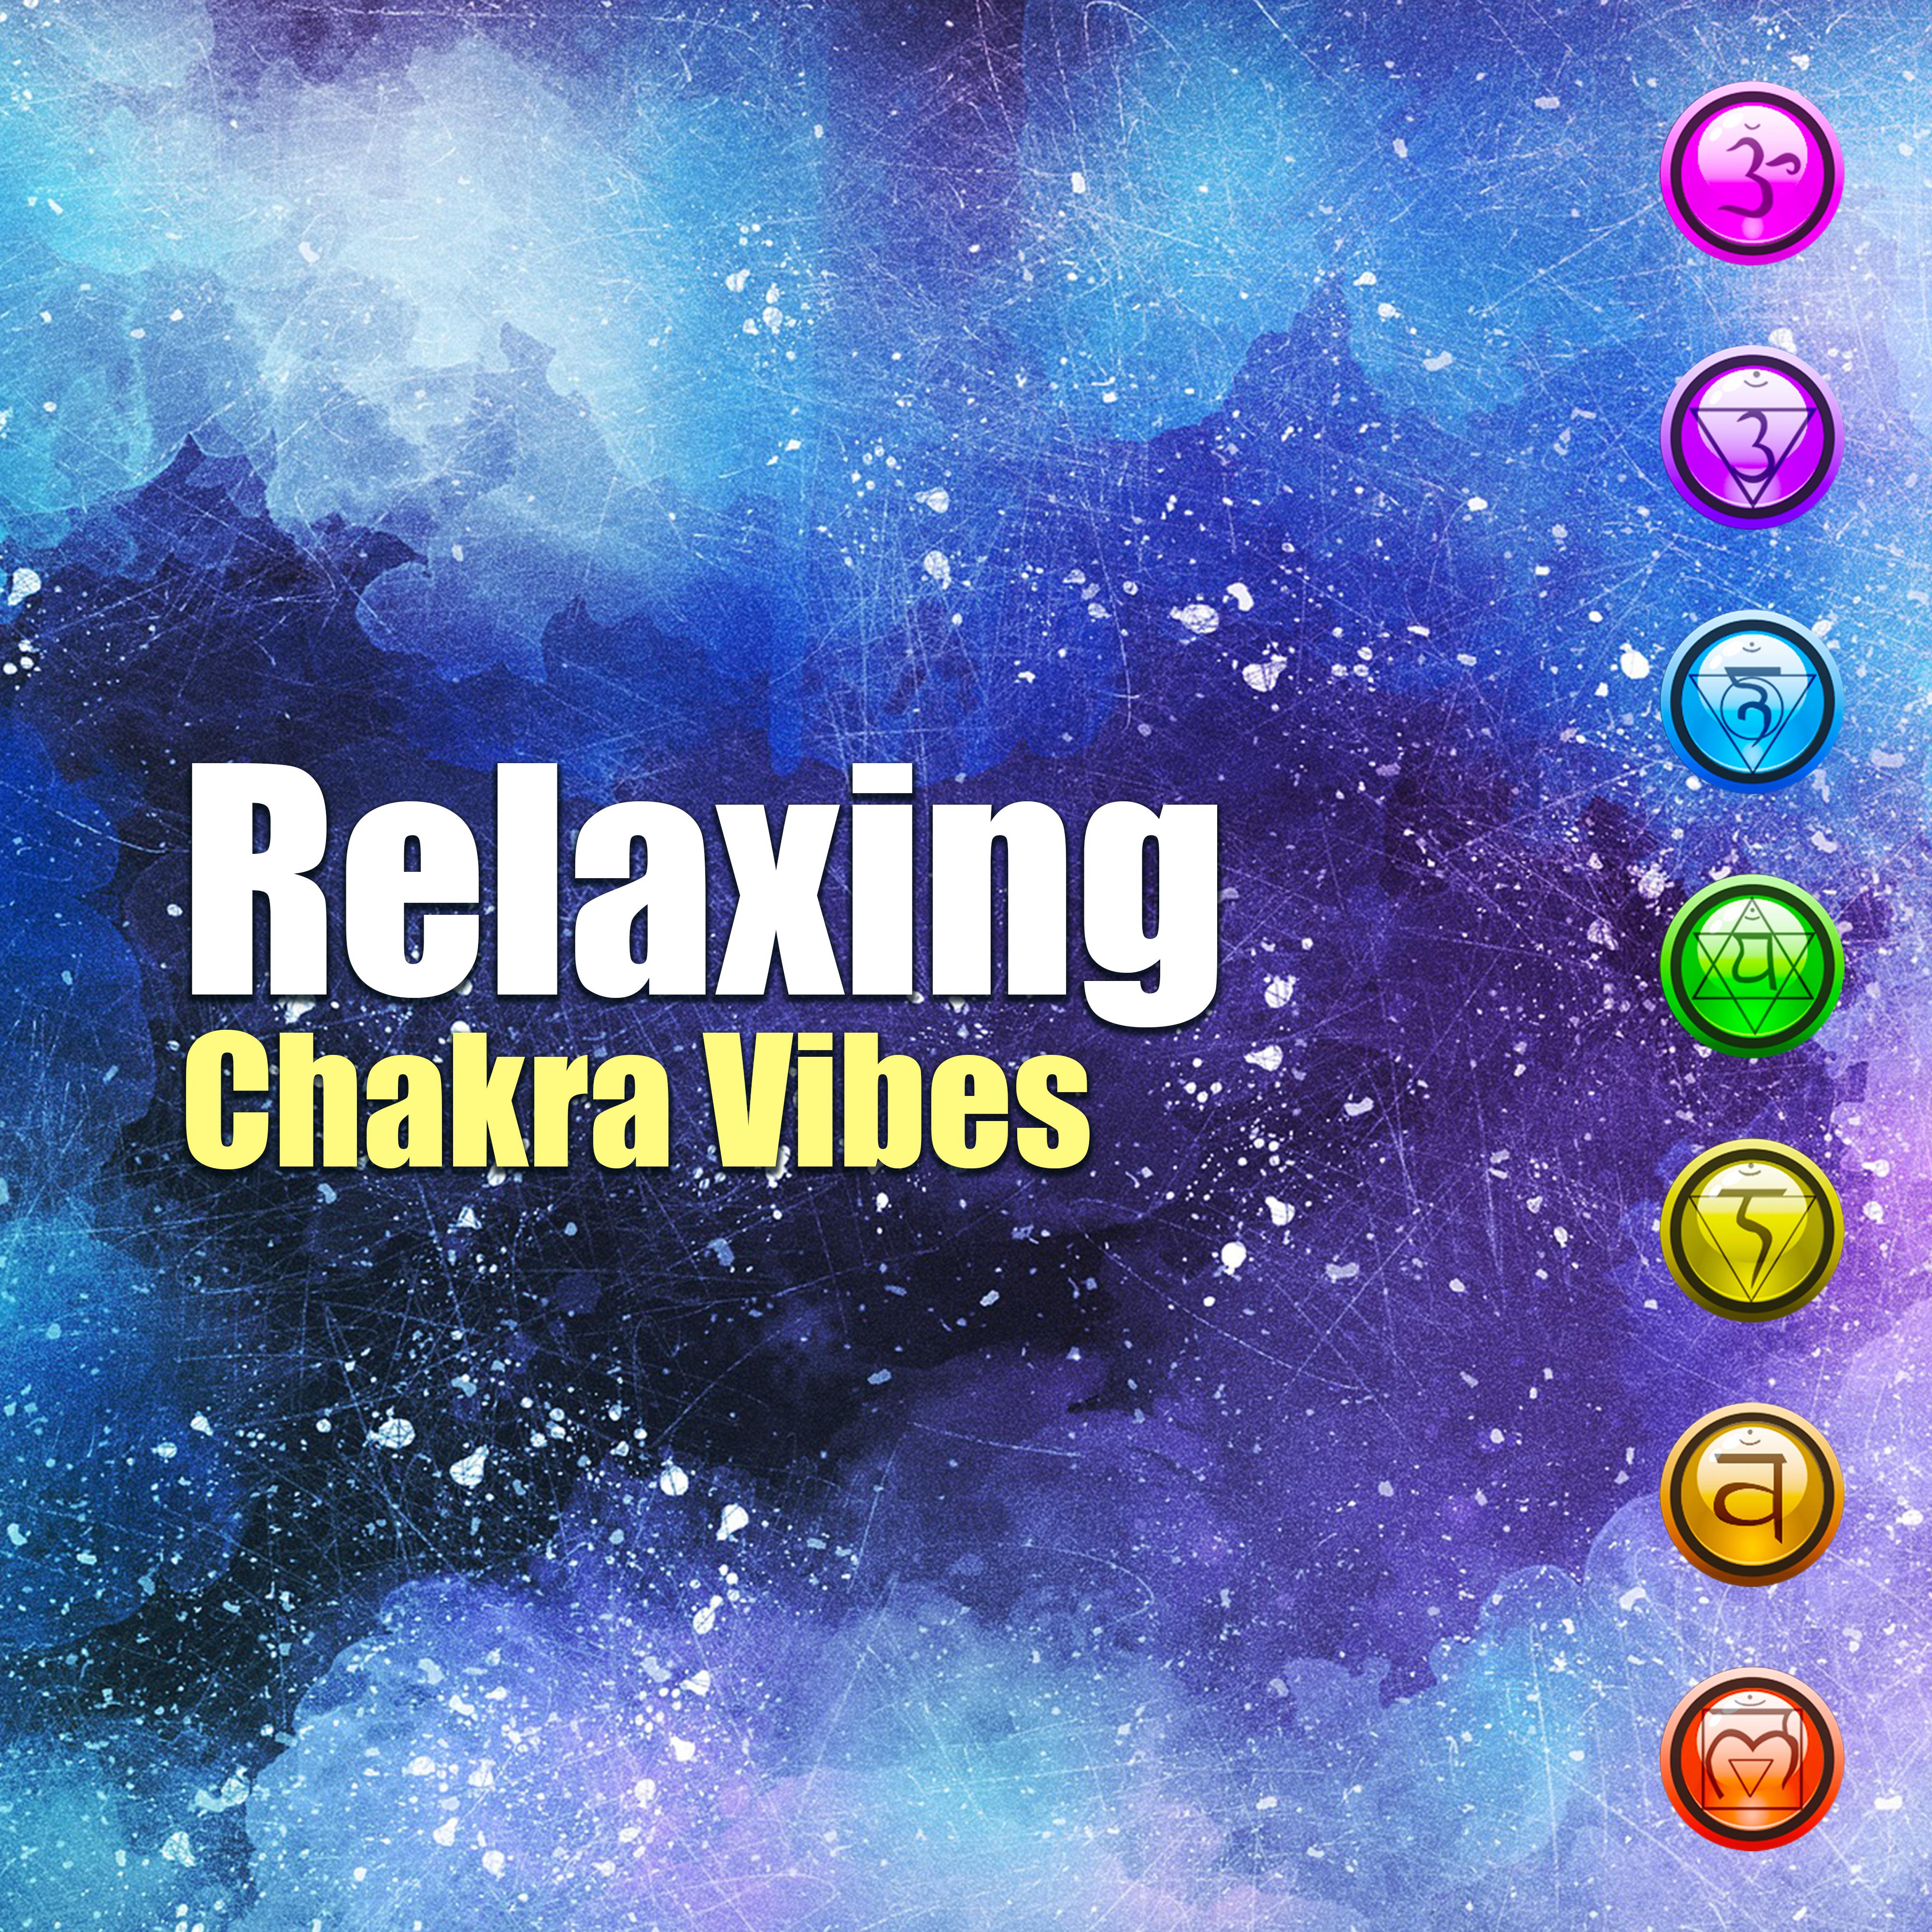 Relaxing Chakra Vibes